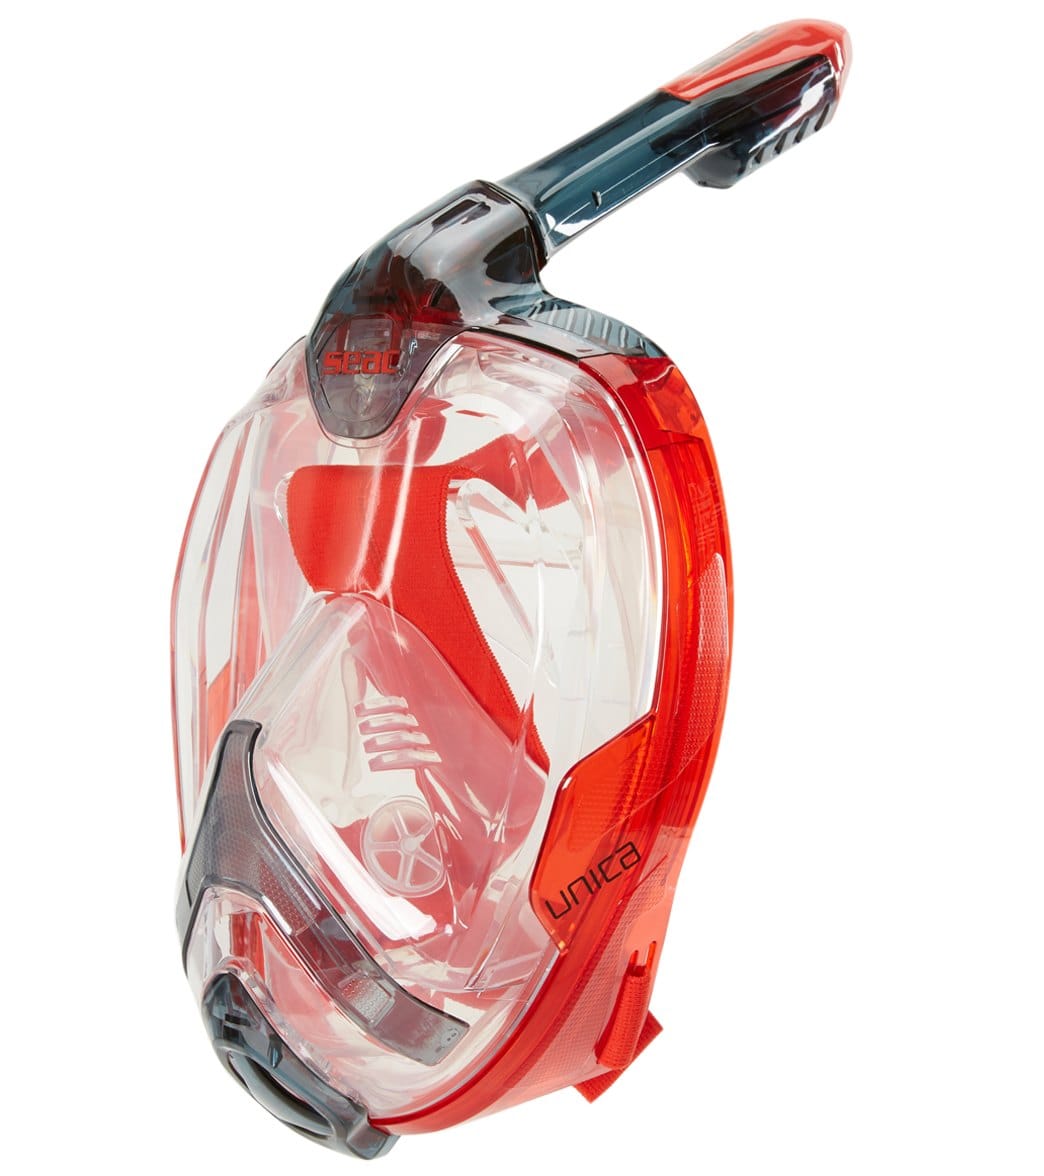 Seac Usa Unica Full Face Snorkeling Mask - Black/Red L/Xl - Swimoutlet.com